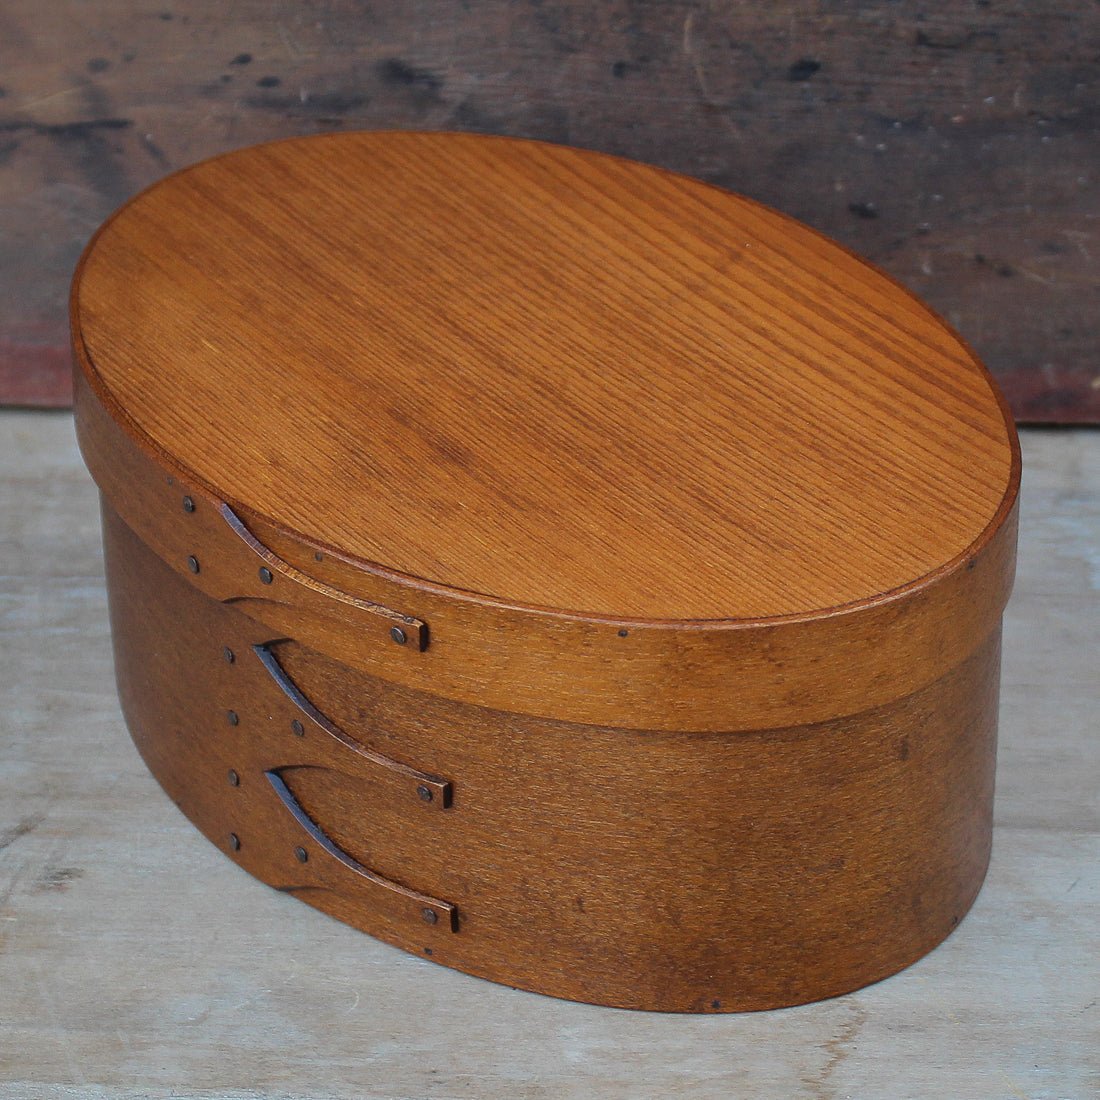 Shaker Oval Box, Size #5, LeHays Shaker Boxes, Handcrafted in Maine.  Antiqued Natural Finish, Side View